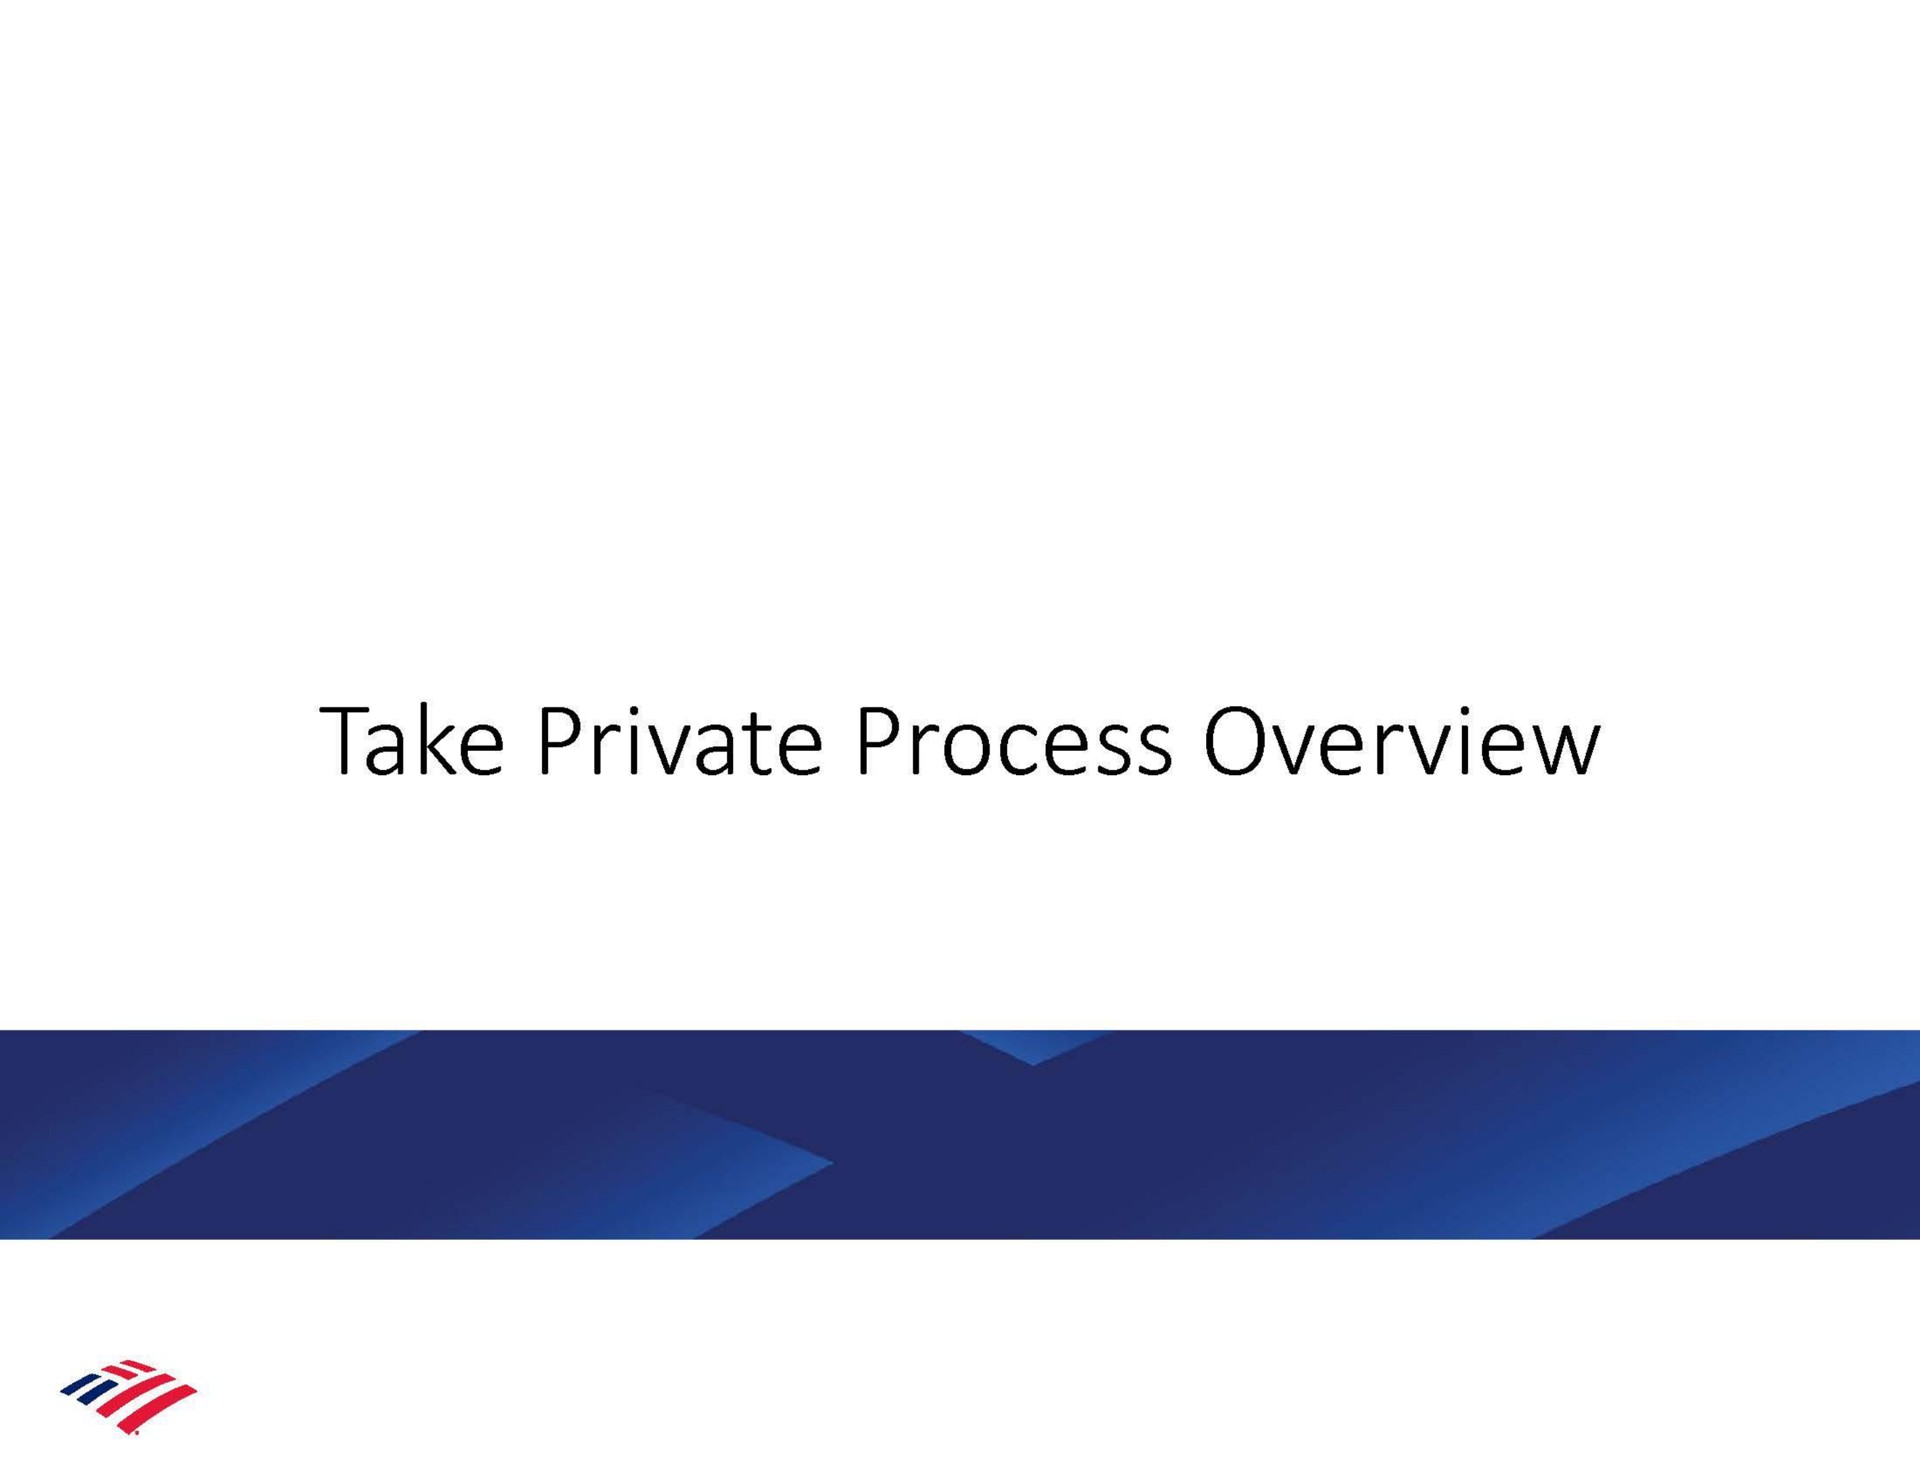 take private process overview as | Bank of America